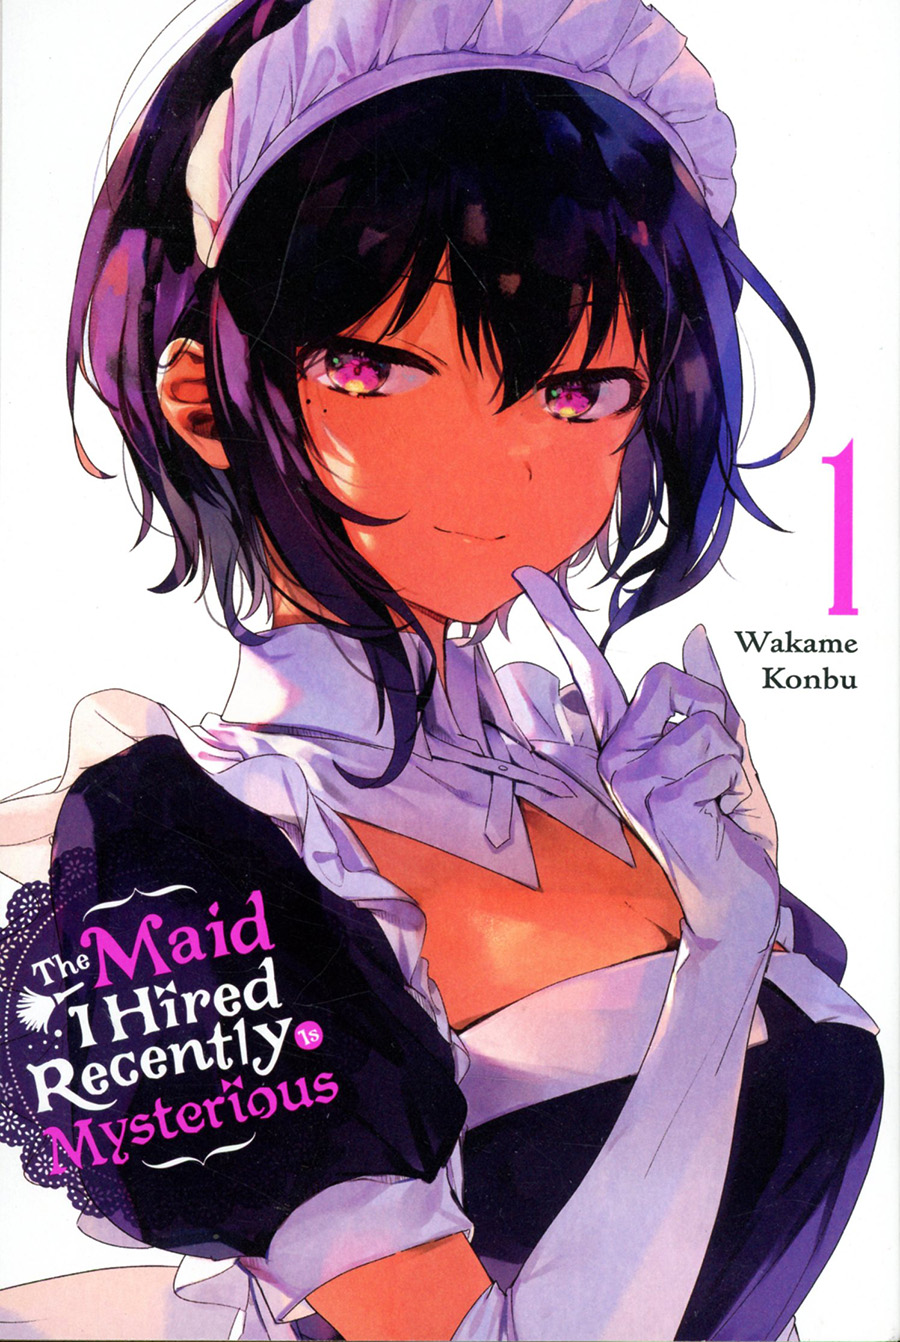 Maid I Hired Recently Is Mysterious Vol 1 GN